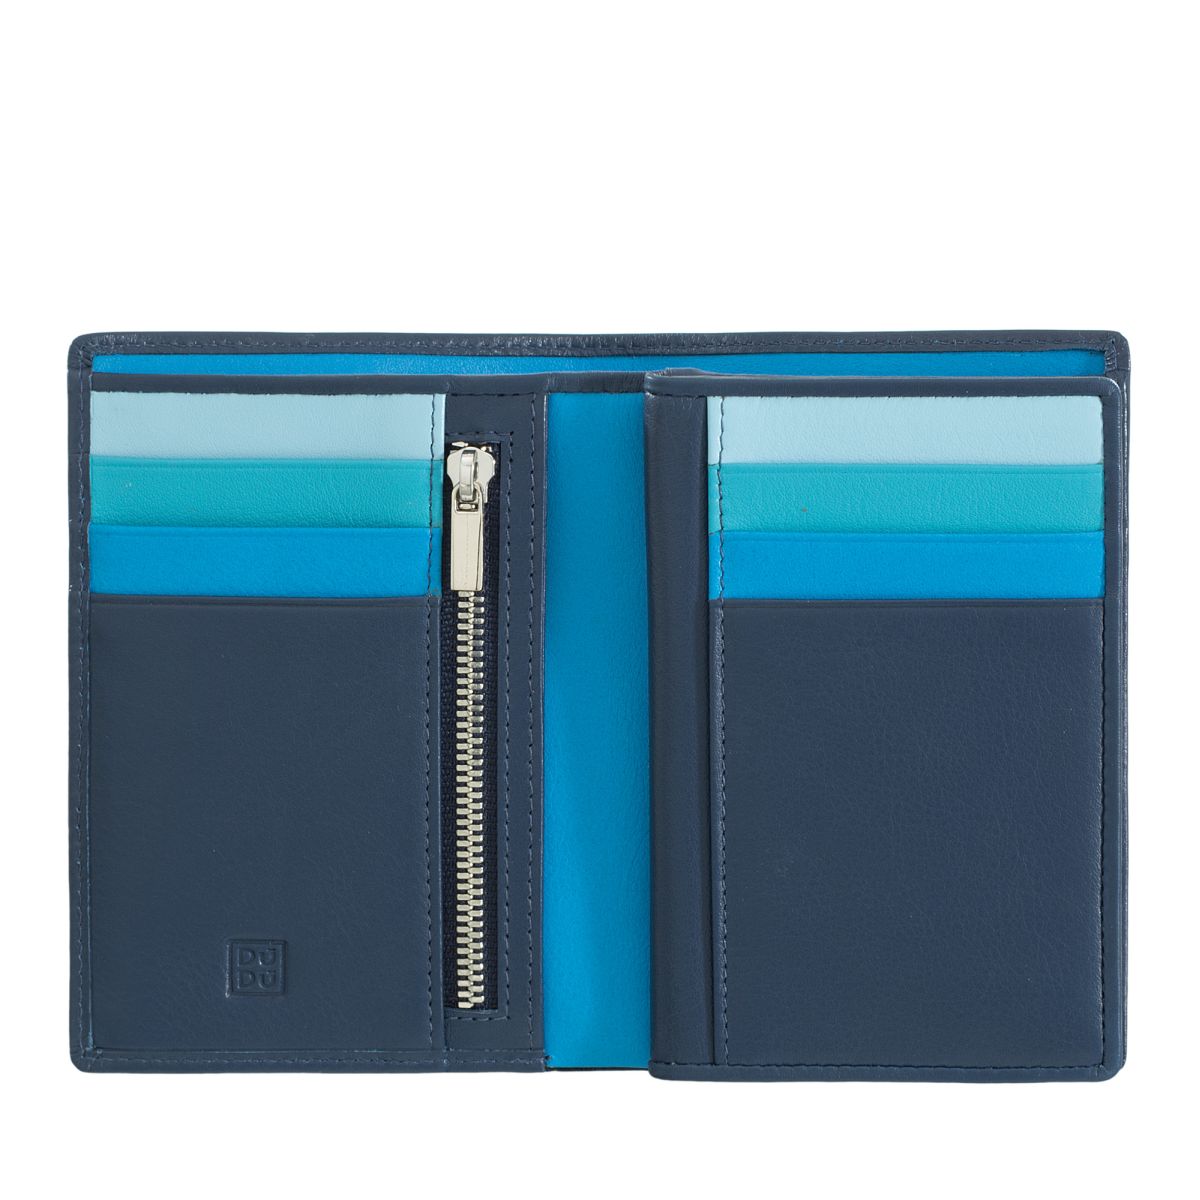 Mans leather folding wallet with inner zip - Blue